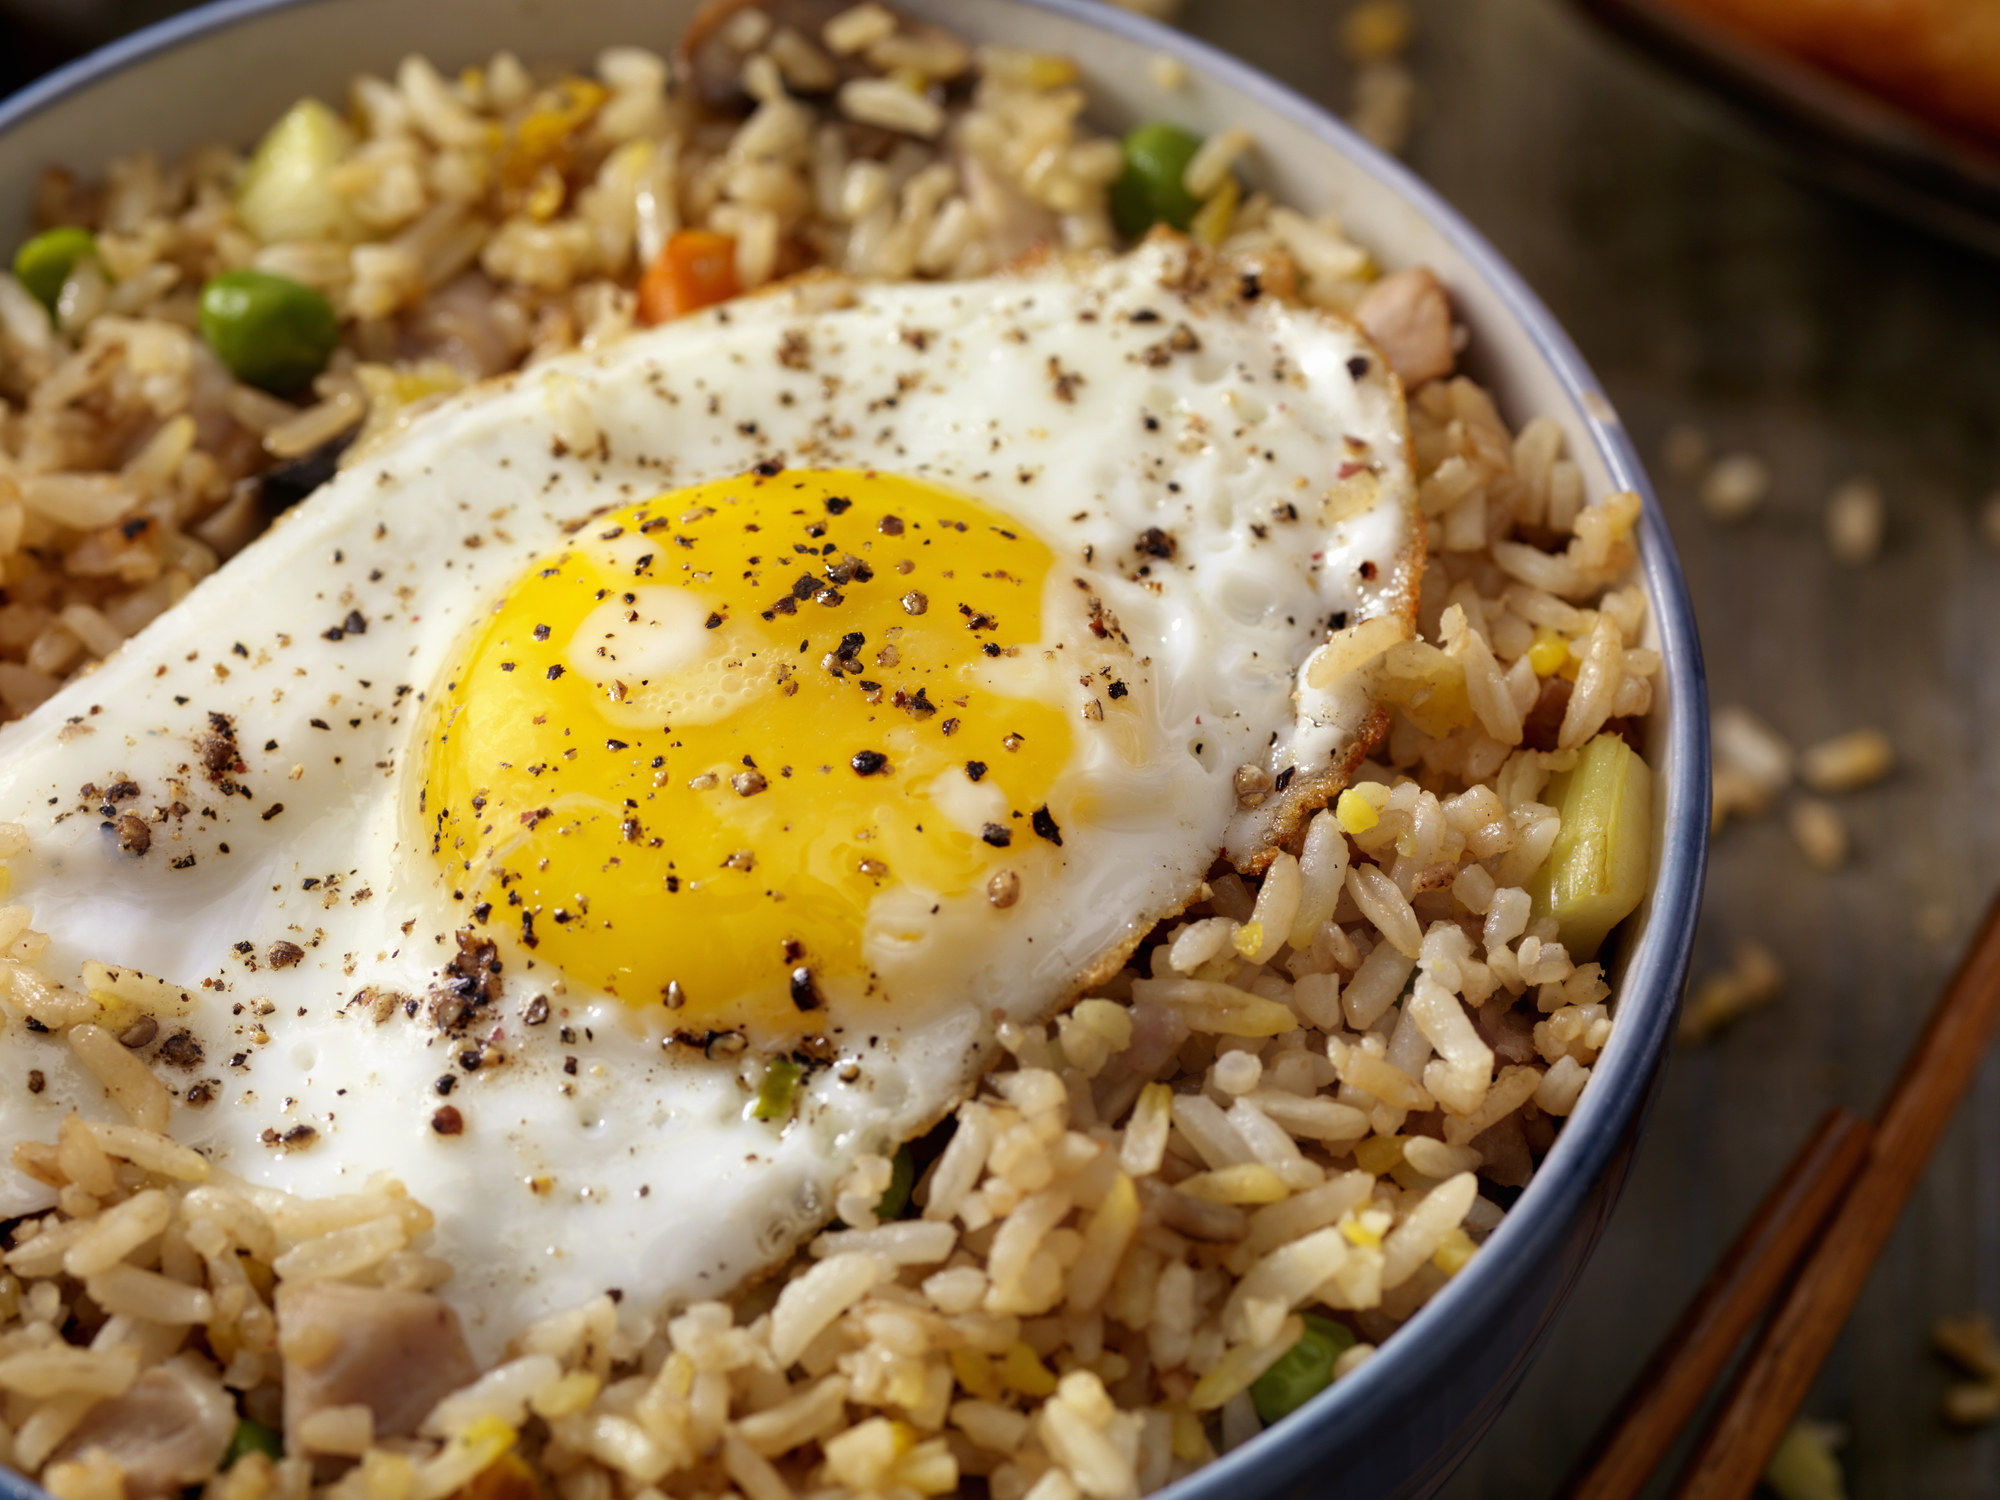 Fried rice with an egg on top.